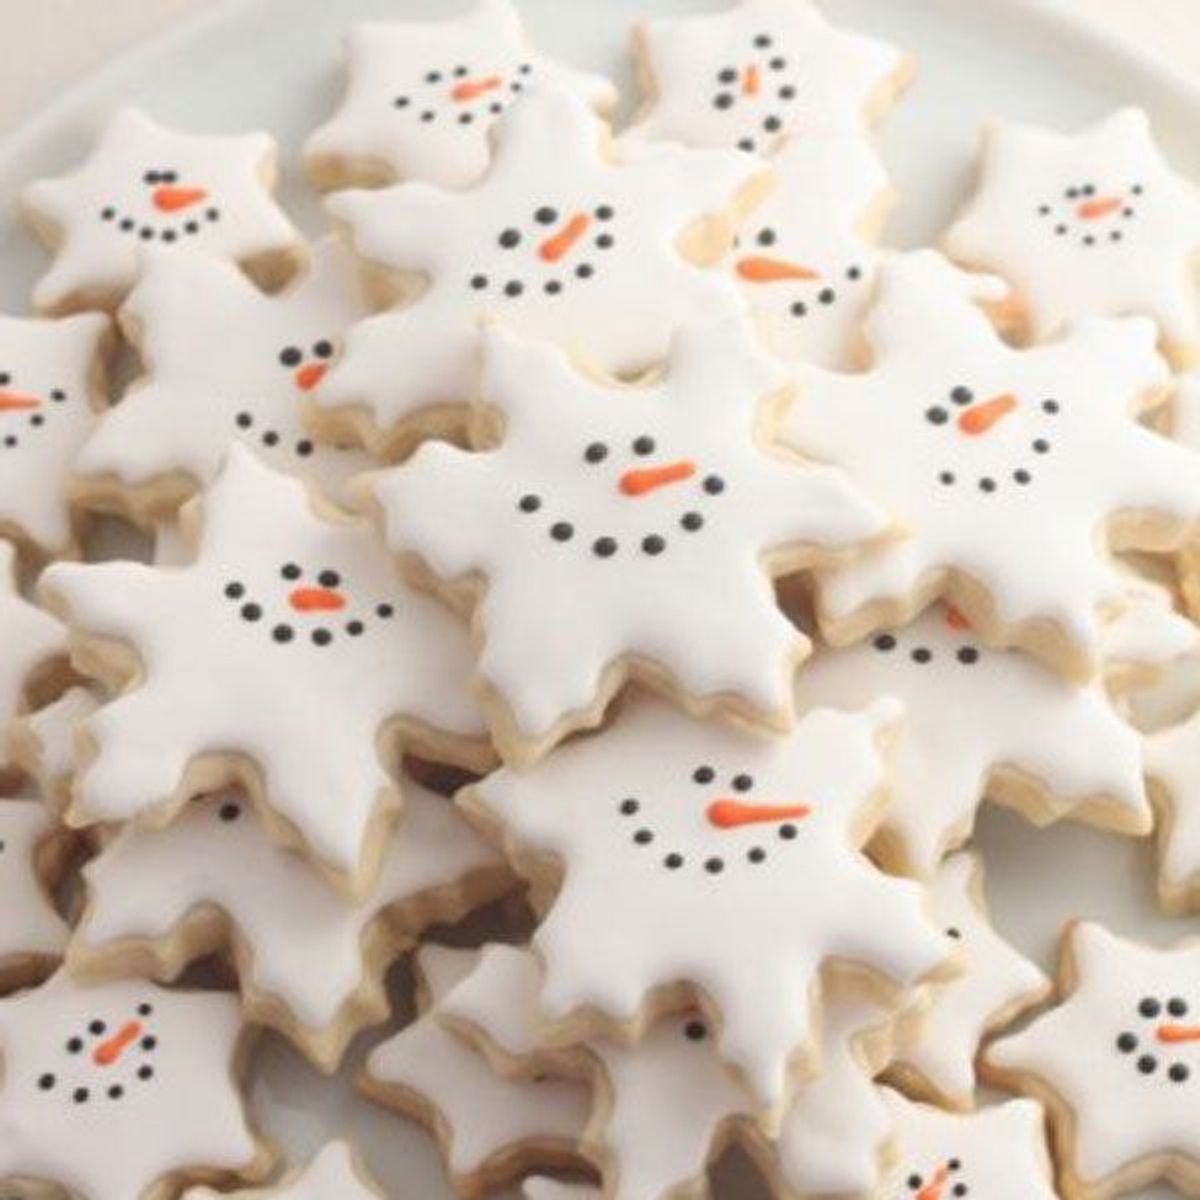 14 Baked Goods That You Should Make This Holiday Season